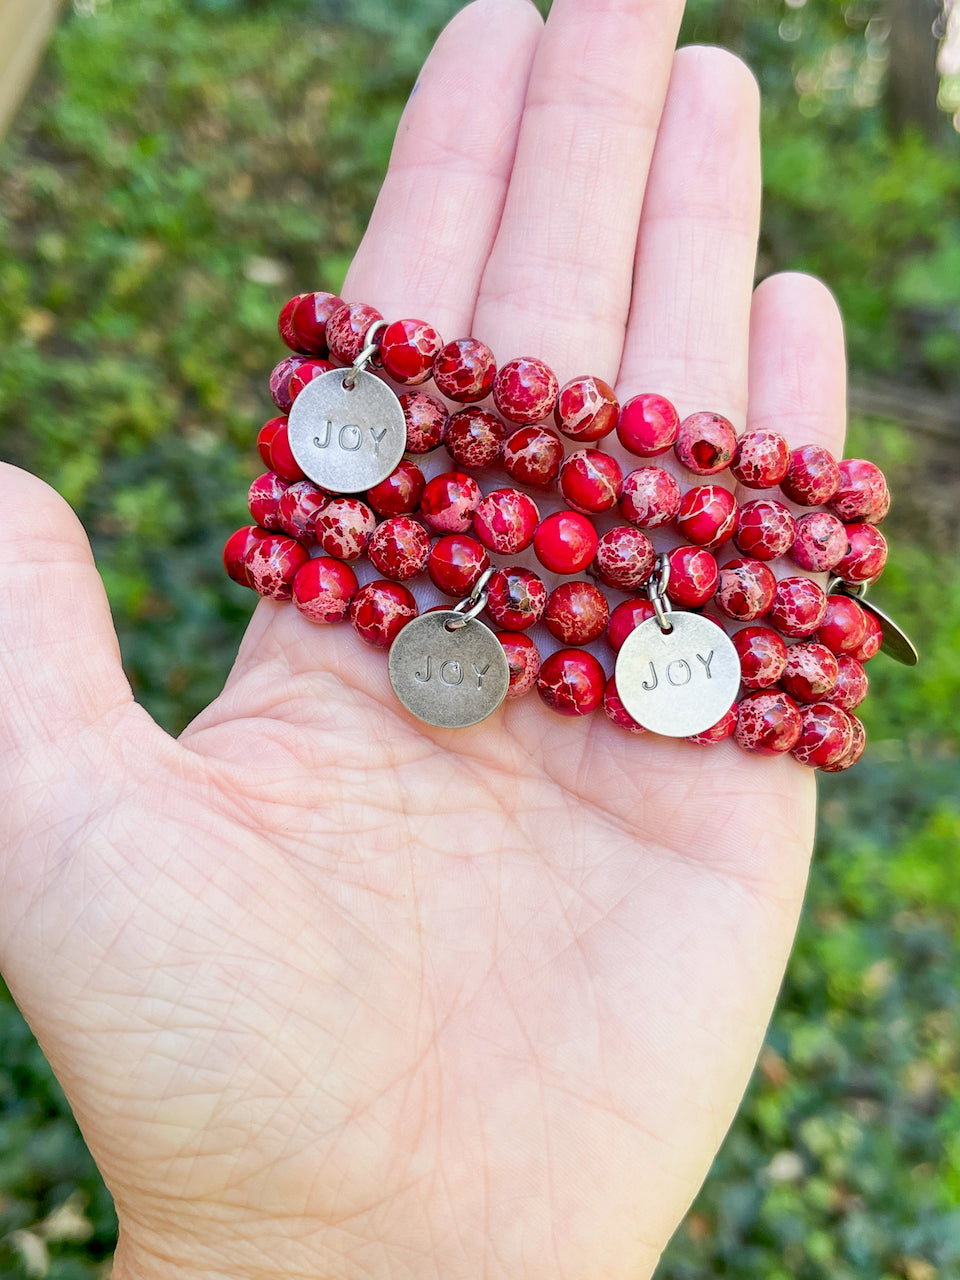 Red Turquoise Bead Bracelet, 8mm, Semi Colon Charm, Natural Stone